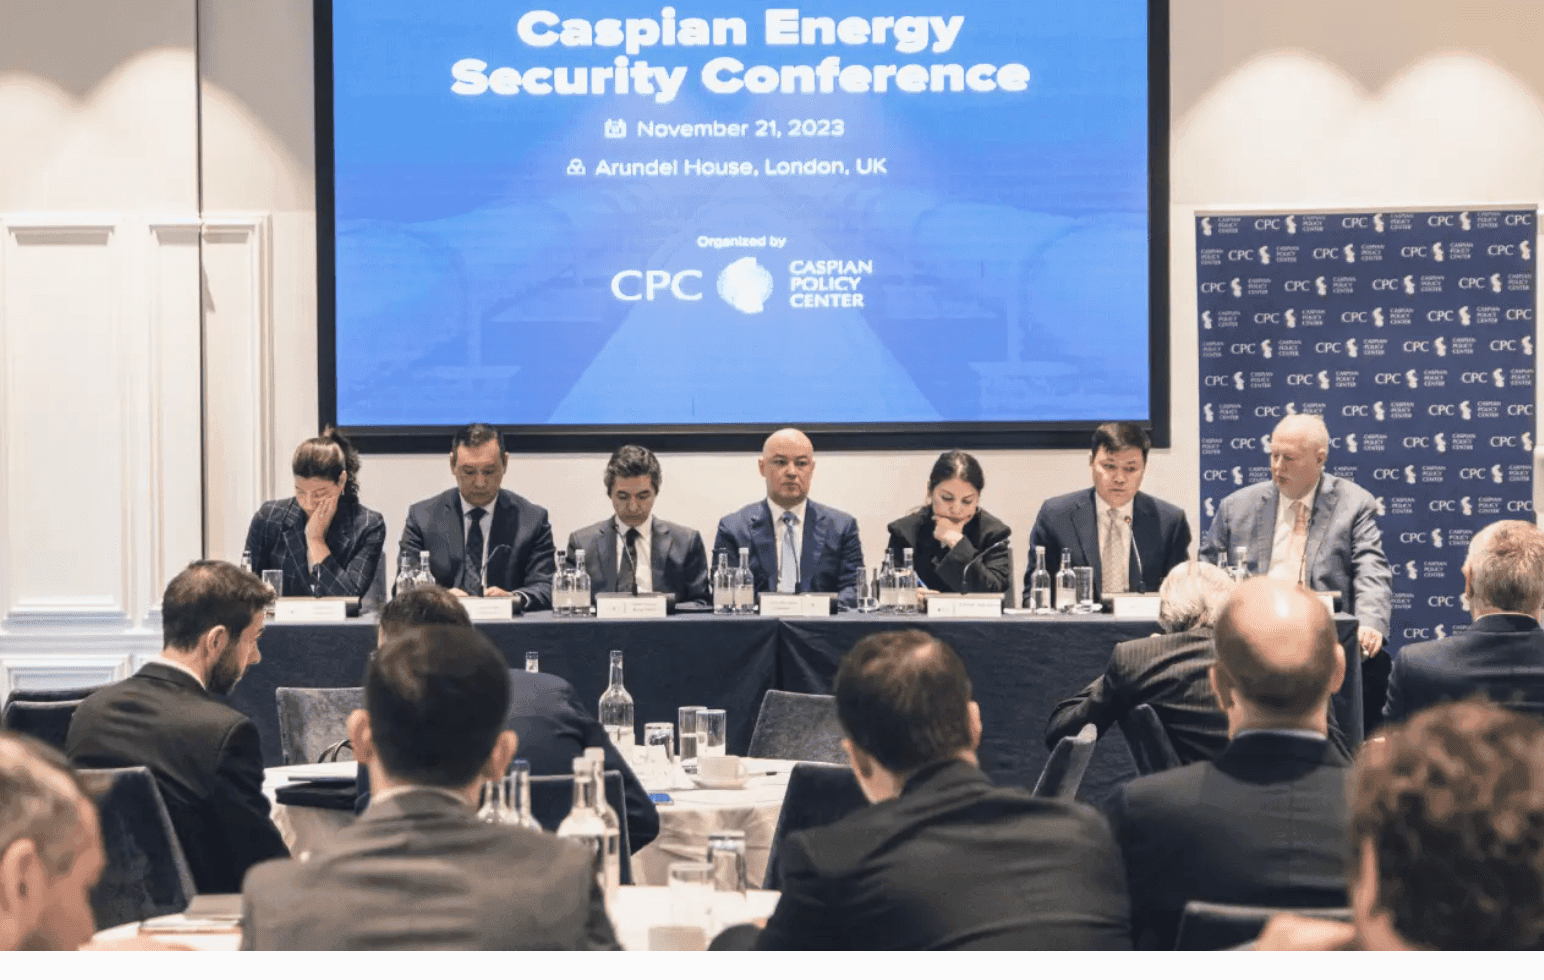 Caspian Energy Security Conference